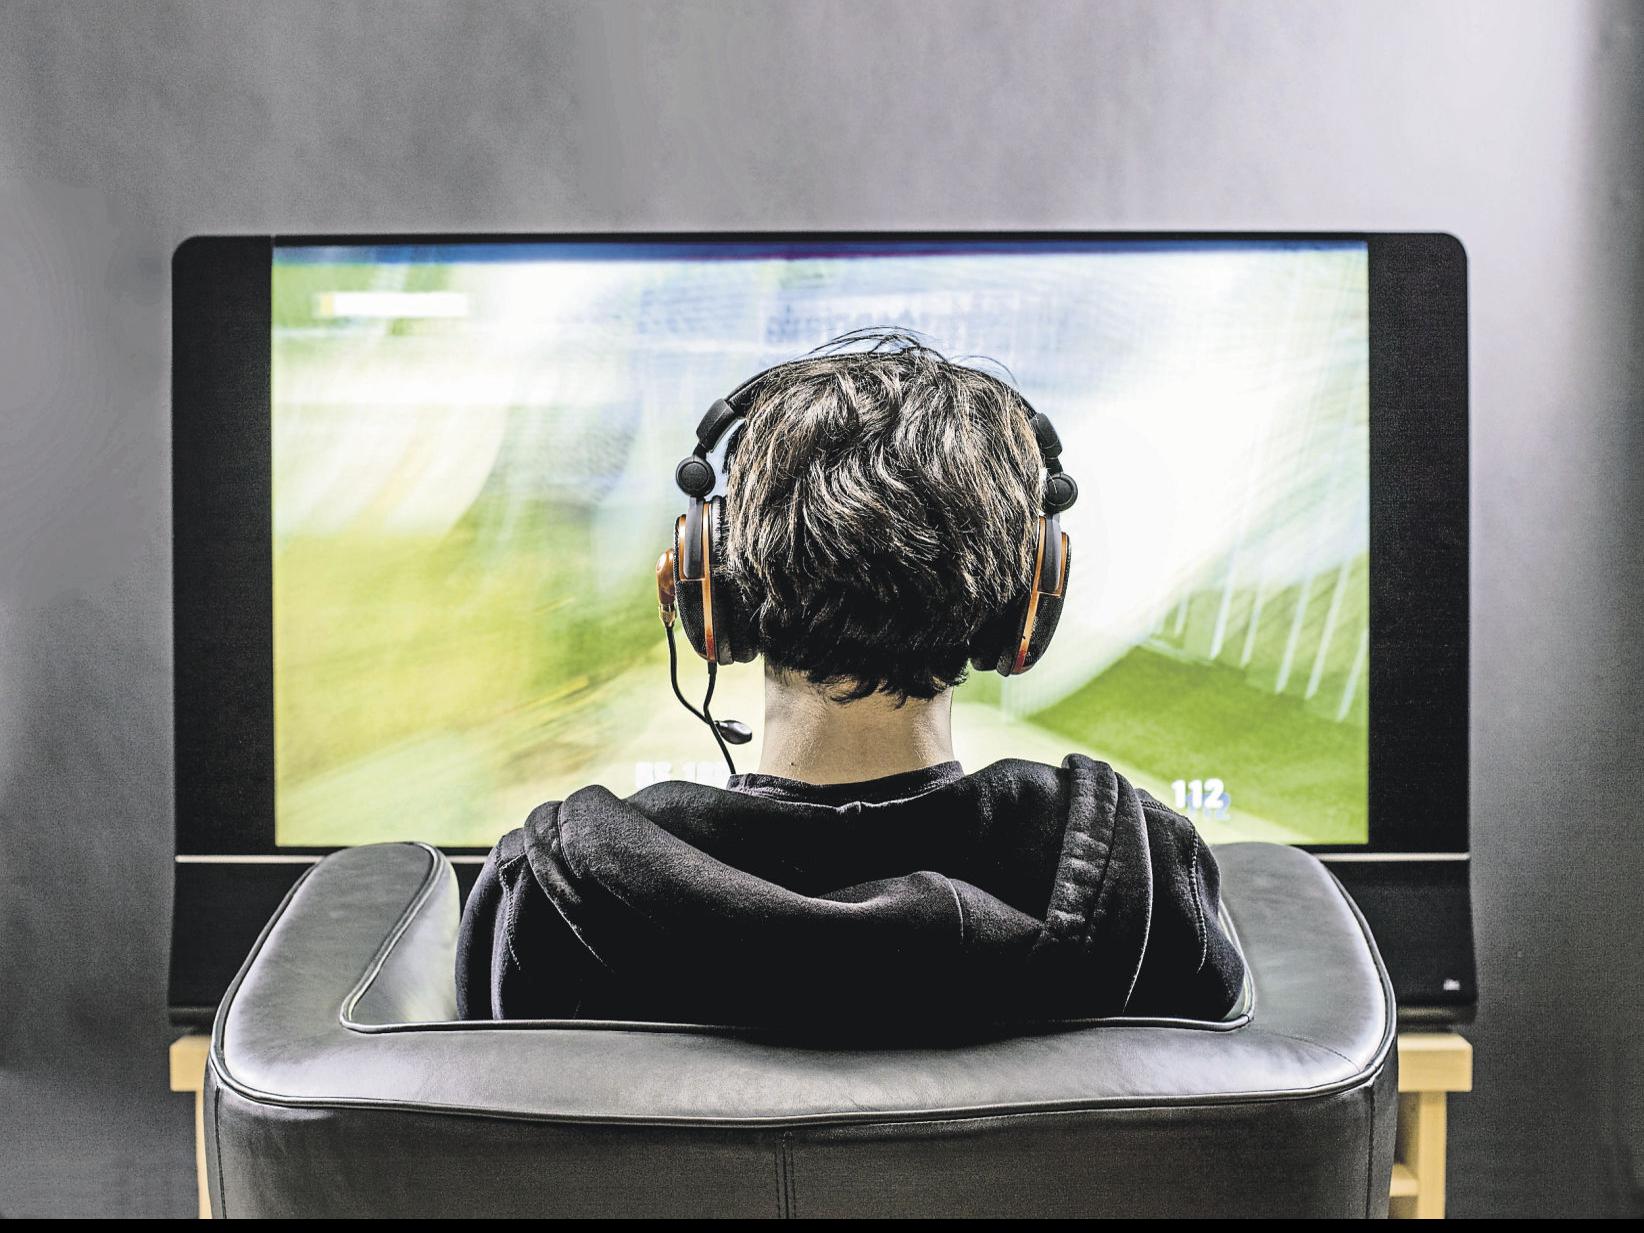 Video games and screen addiction - Mayo Clinic Health System